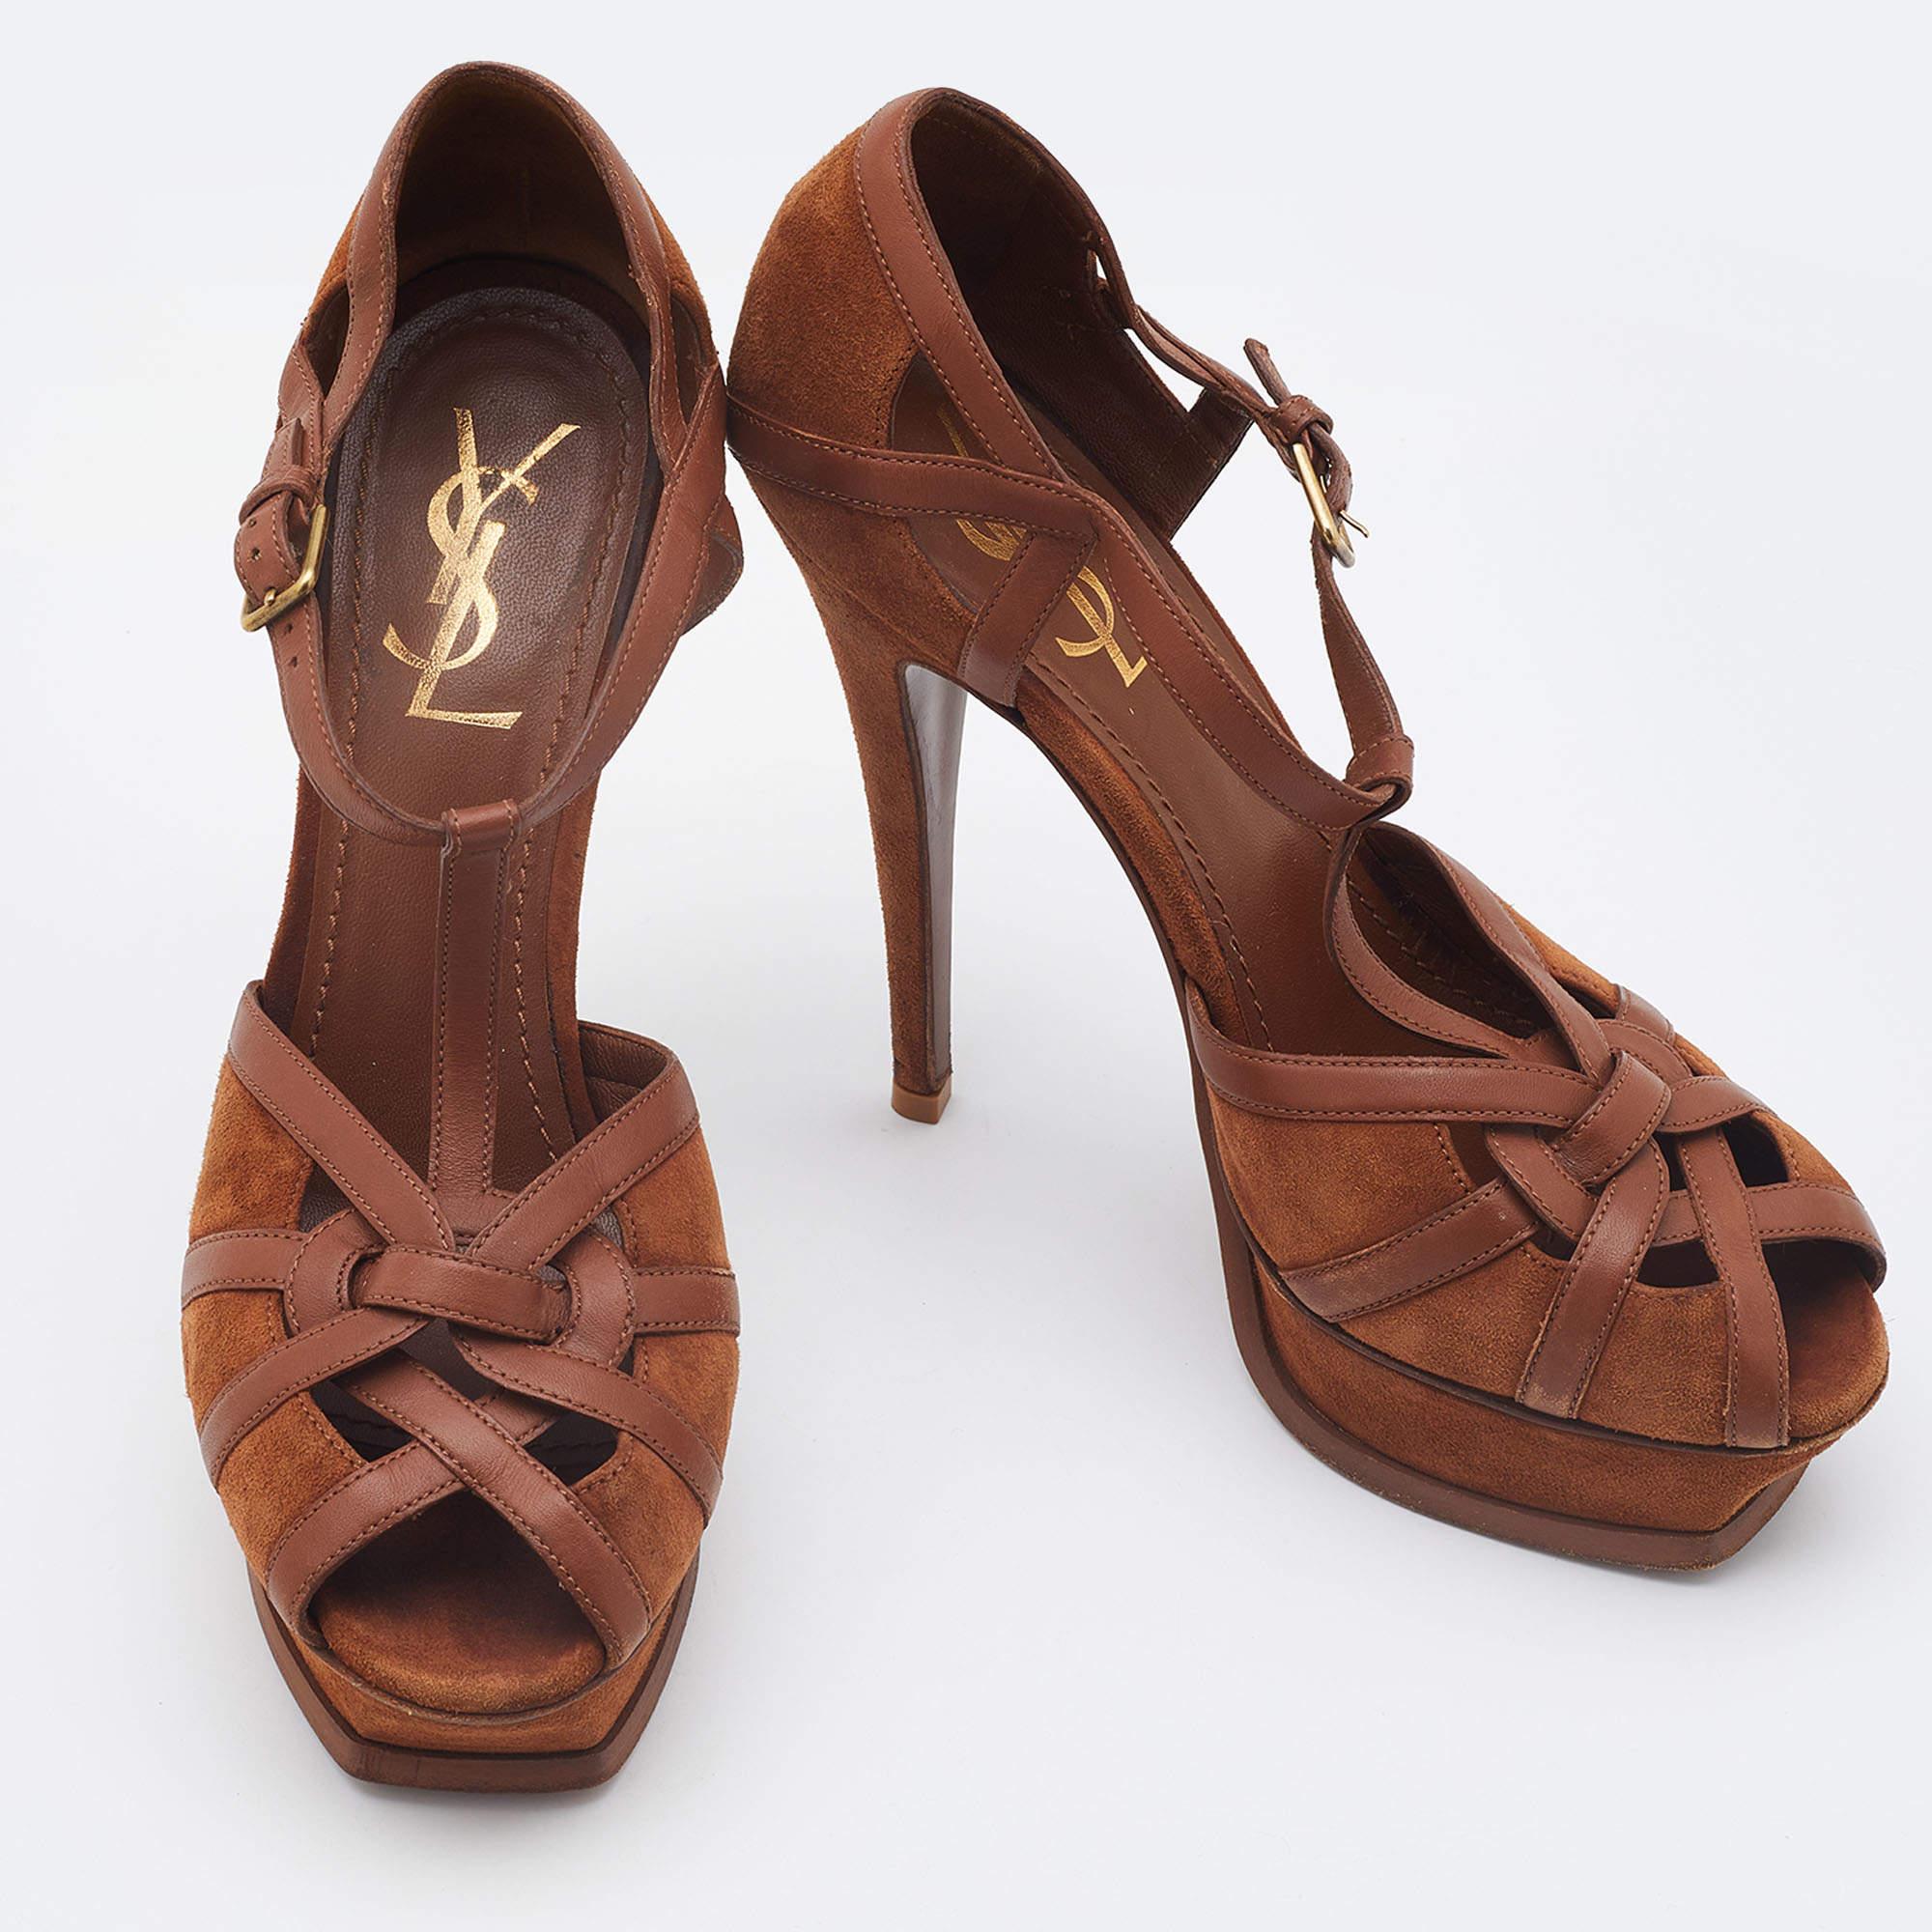 Yves Saint Laurent Brown Suede and Leather Tribute Sandals Size 38.5 For Sale 1